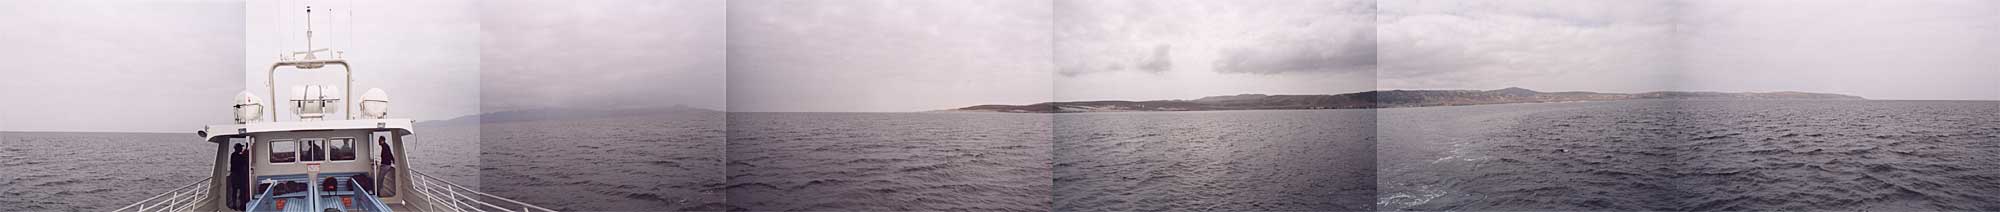 34N x 120W Panorama (full-size image shows boat as well)